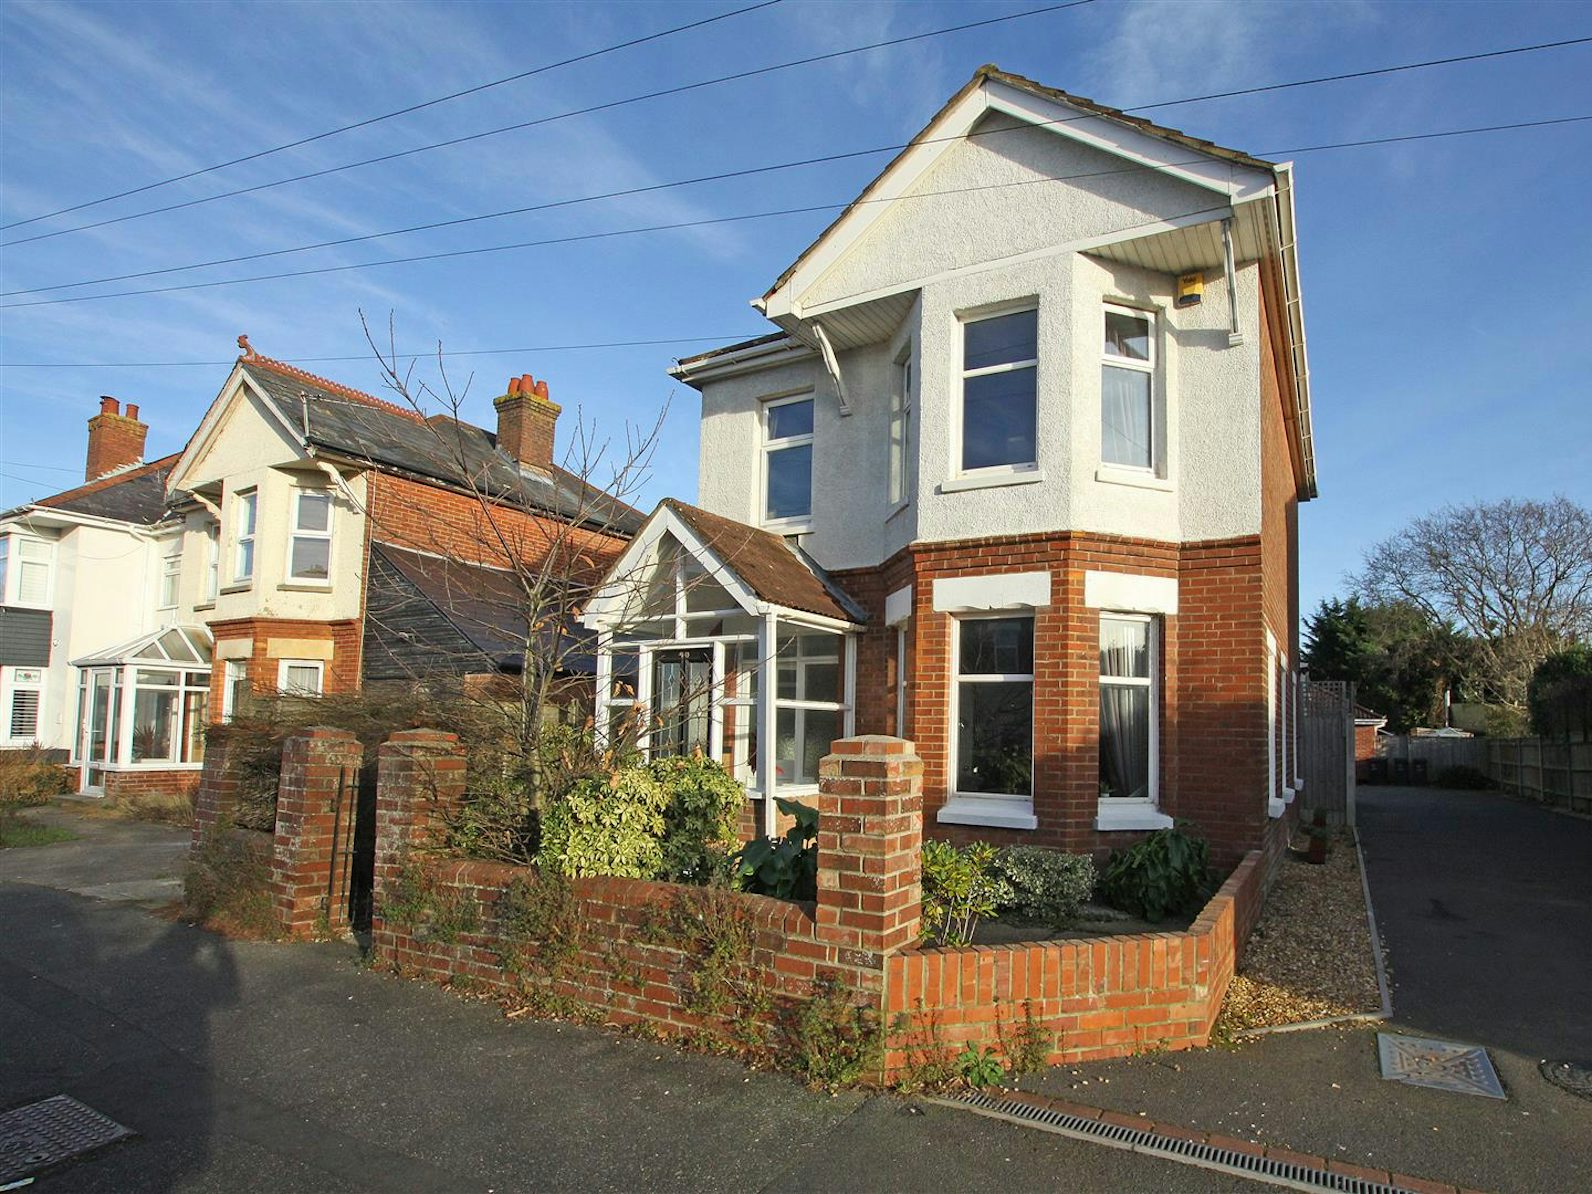 Detached house for sale on Beswick Avenue Bournemouth, BH10